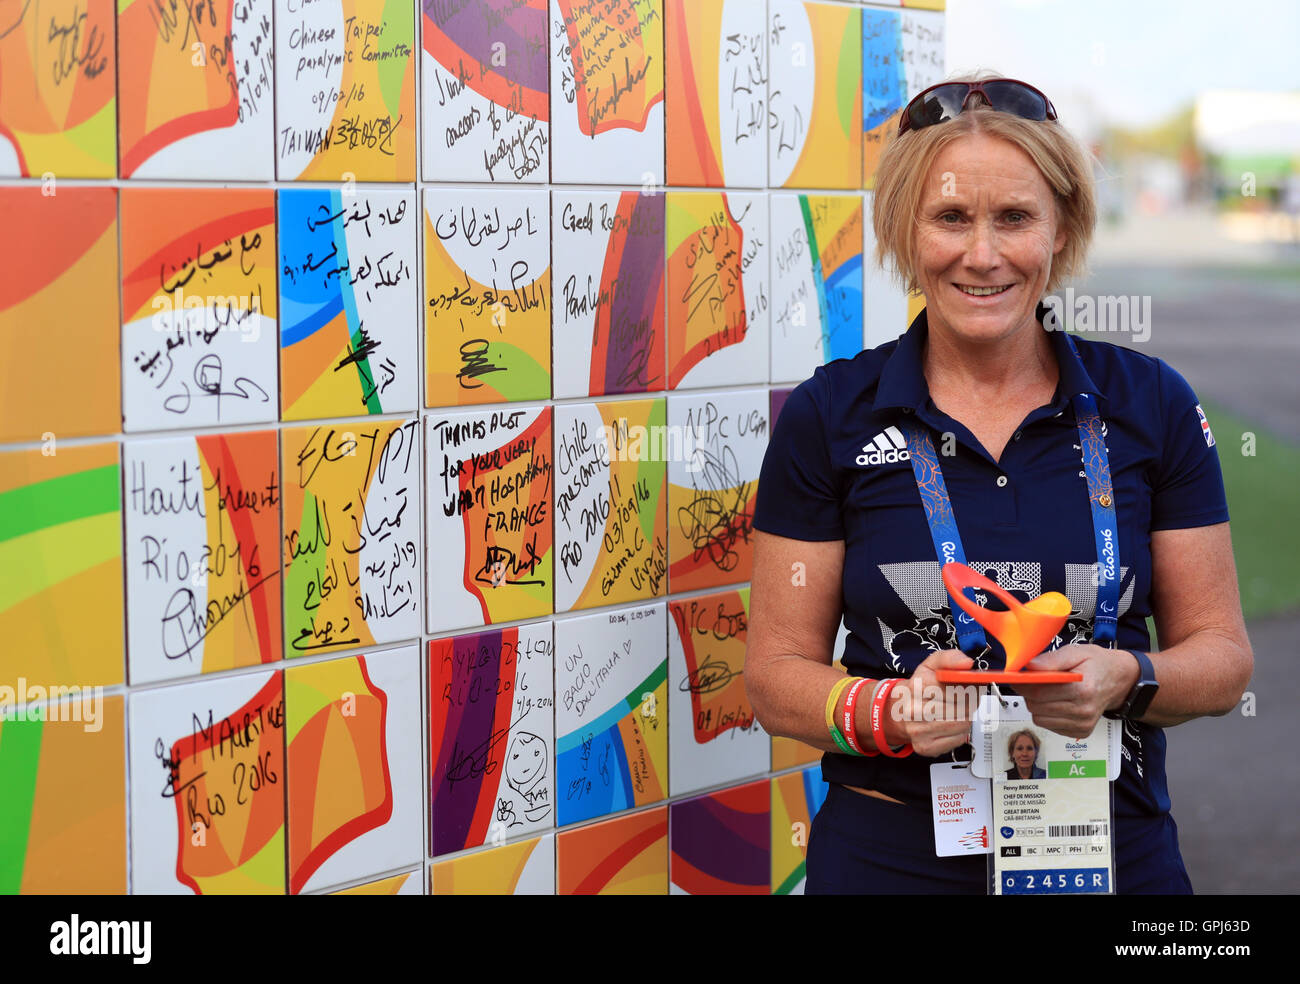 The Chef de Mission for the GB Paralympic team Penny Briscoe after the Welcome Ceremony at the Athletes Village ahead of the 2016 Rio Paralympic Games, Brazil. Stock Photo